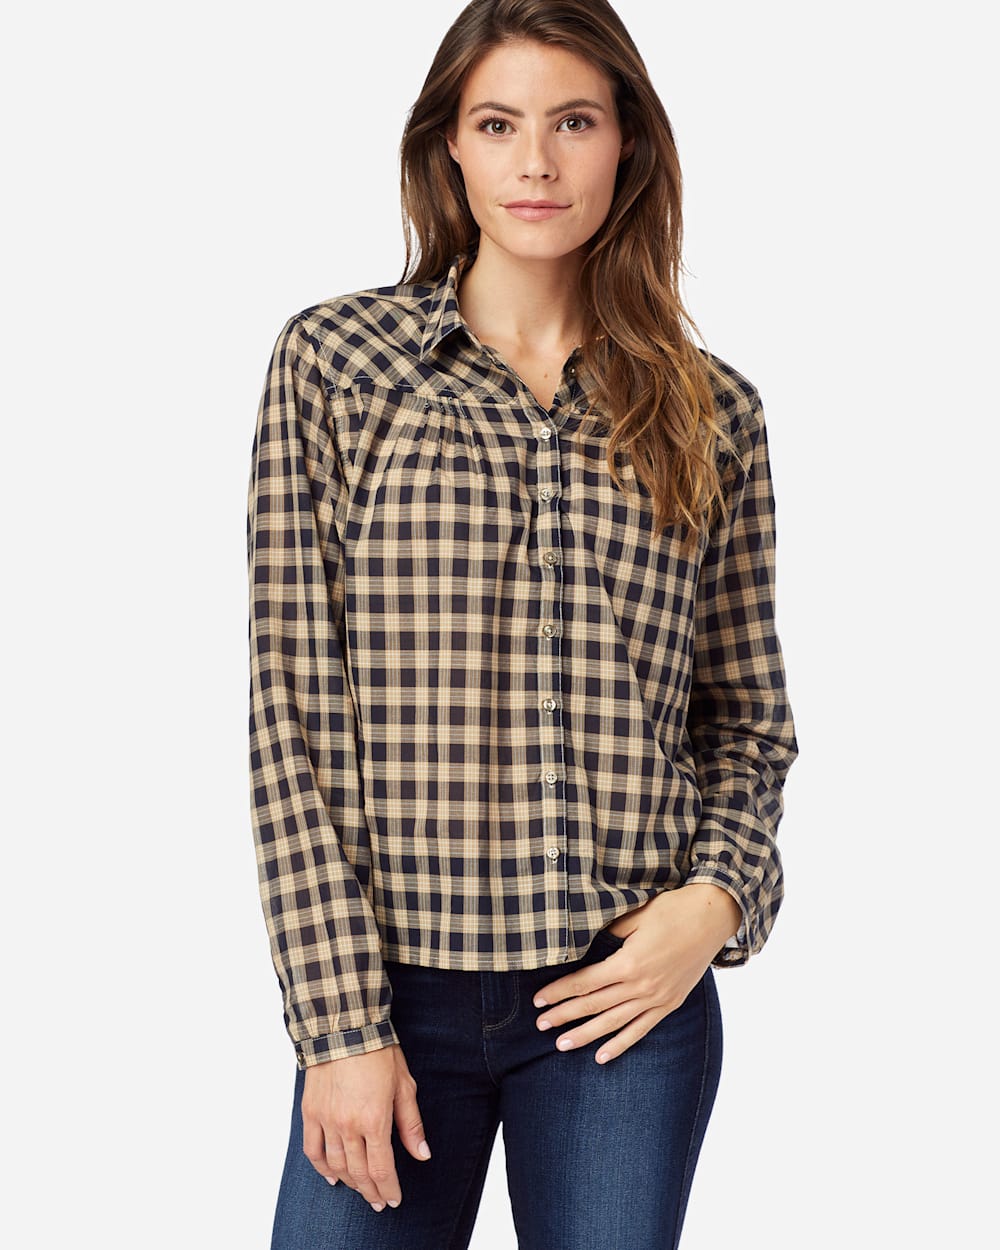 WOMEN' S AIRY COTTON SHIRT IN NAVY/TAN CHECK image number 1